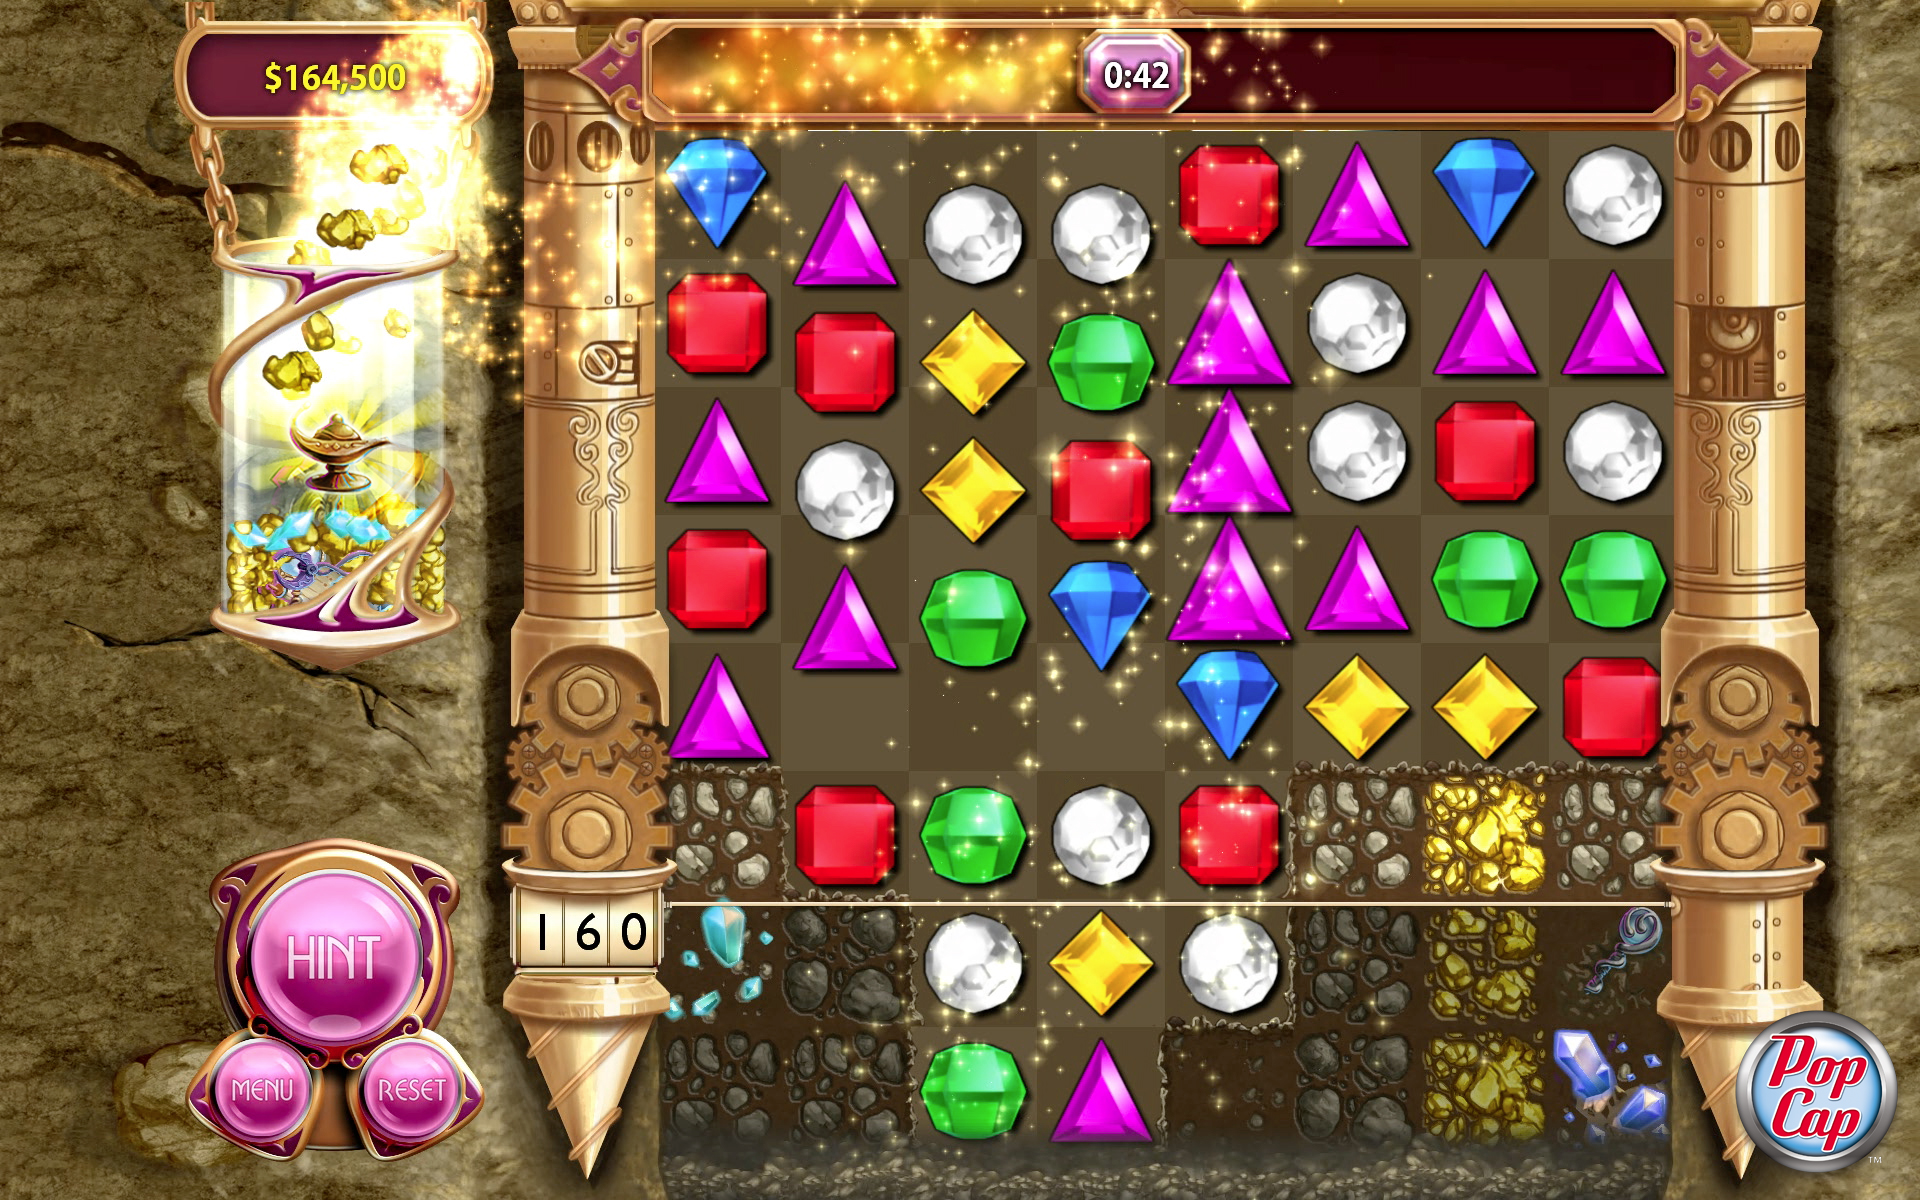 Tải game Bejeweled 3 cho Android và iOS